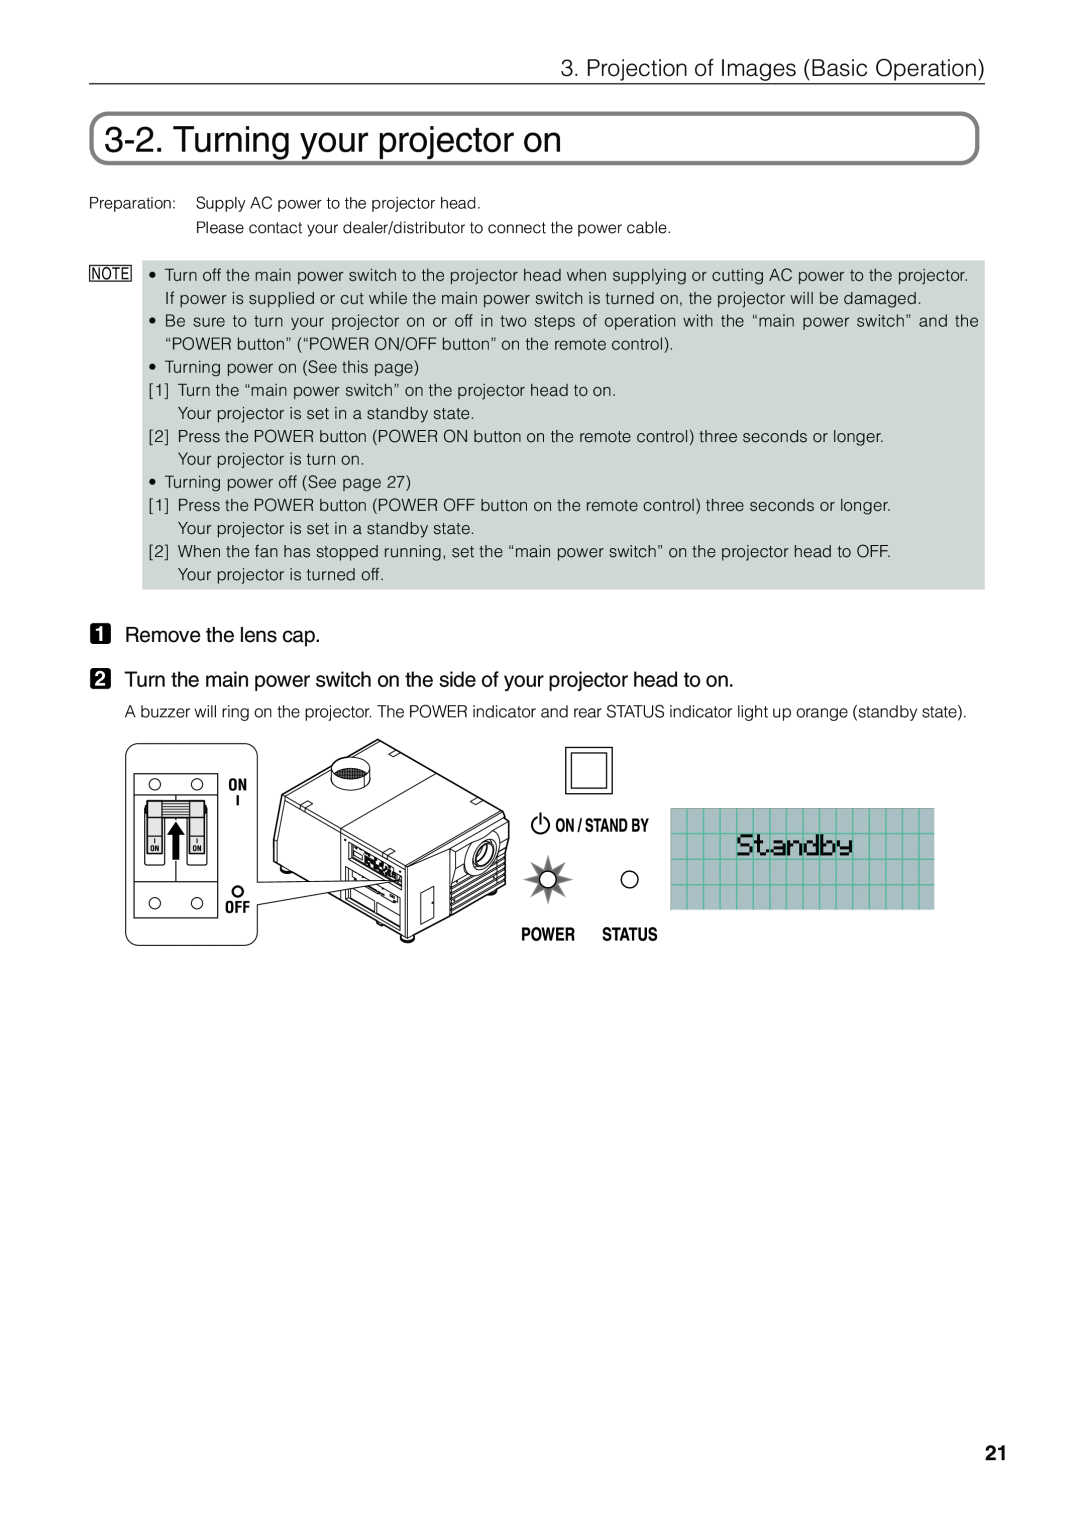 NEC NC1600C user manual Turning your projector on, Projection of Images Basic Operation 